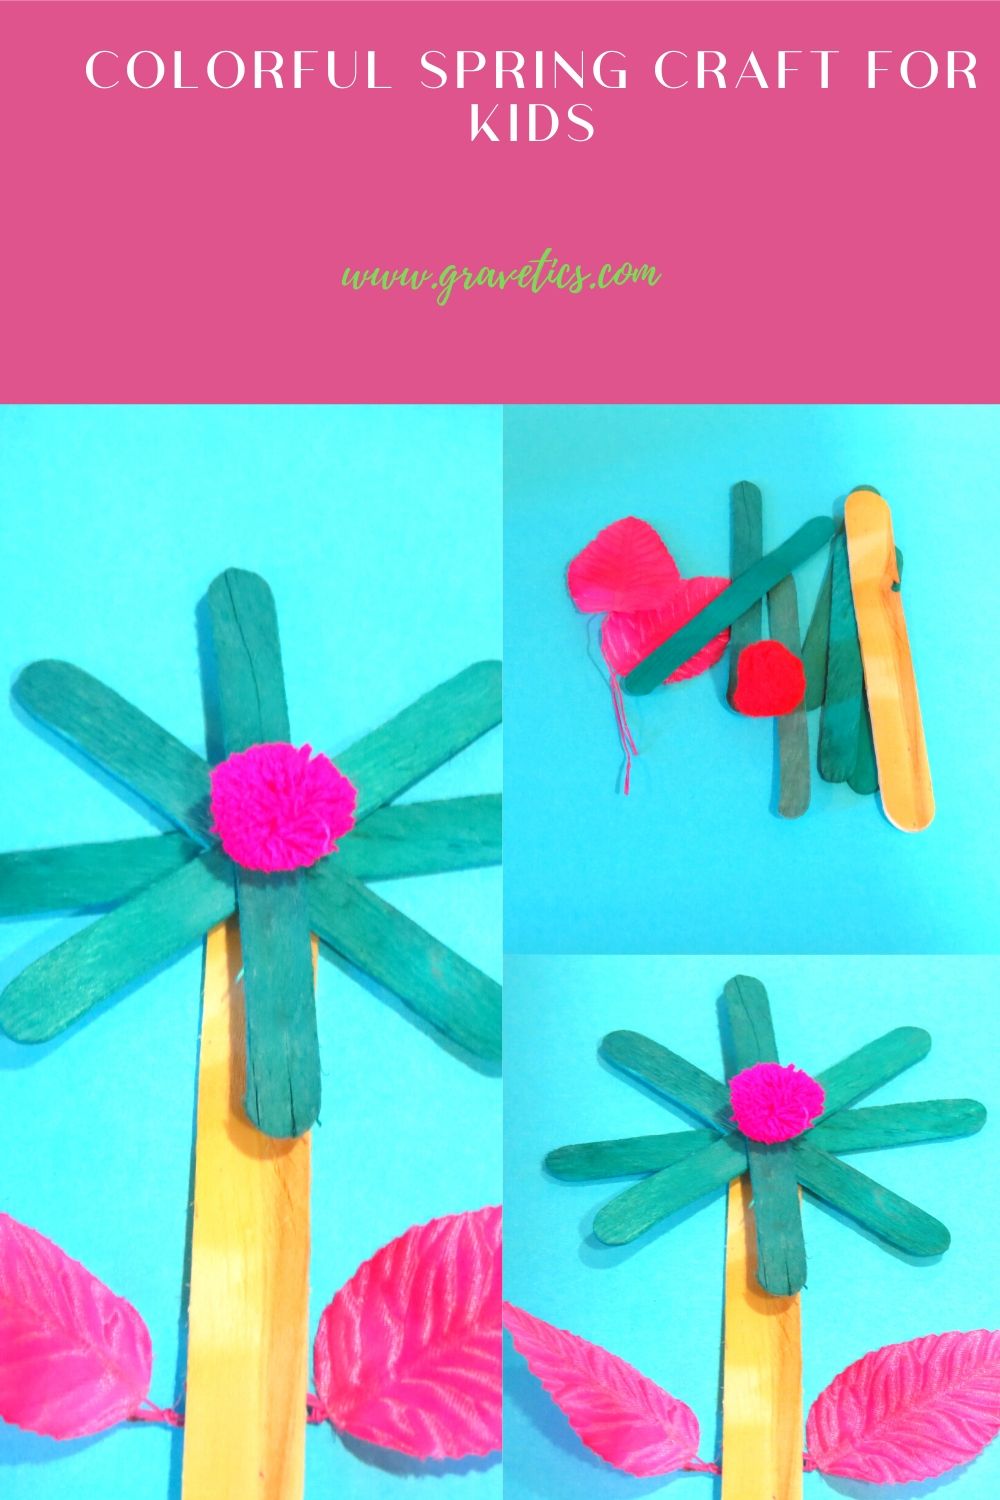 Colorful Spring Craft for Kids